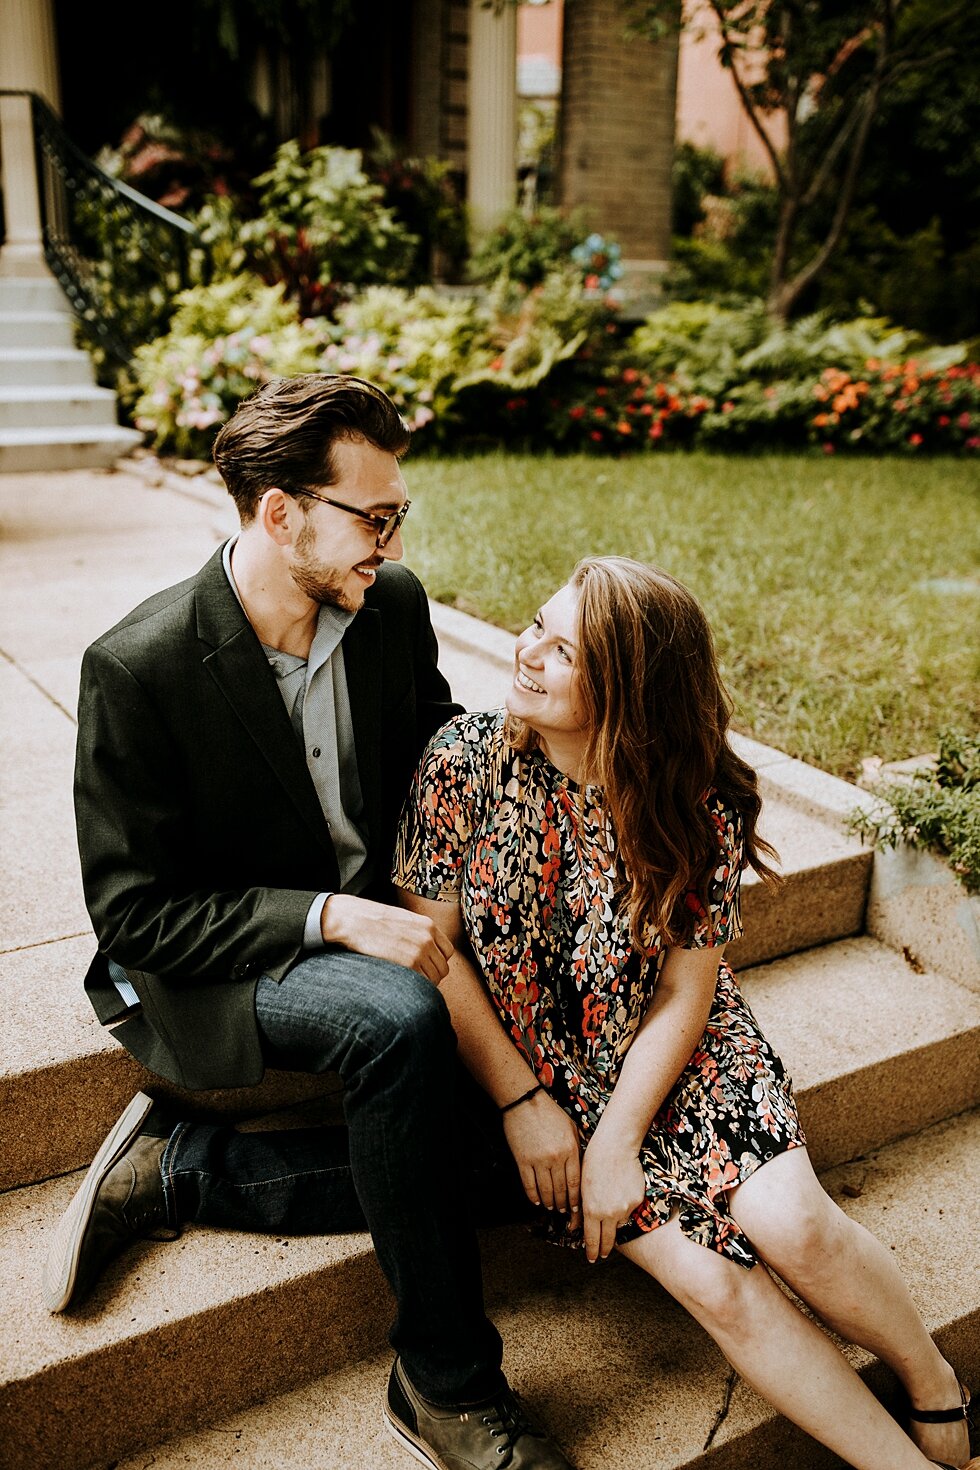  Engaged couple sitting on the steps on a beautiful August day. getting married outdoor session engaged couple together wedding preparation love excited stunning relationship #engagementphotos #midwestphotographer #kywedding #louisville #stjamescourt